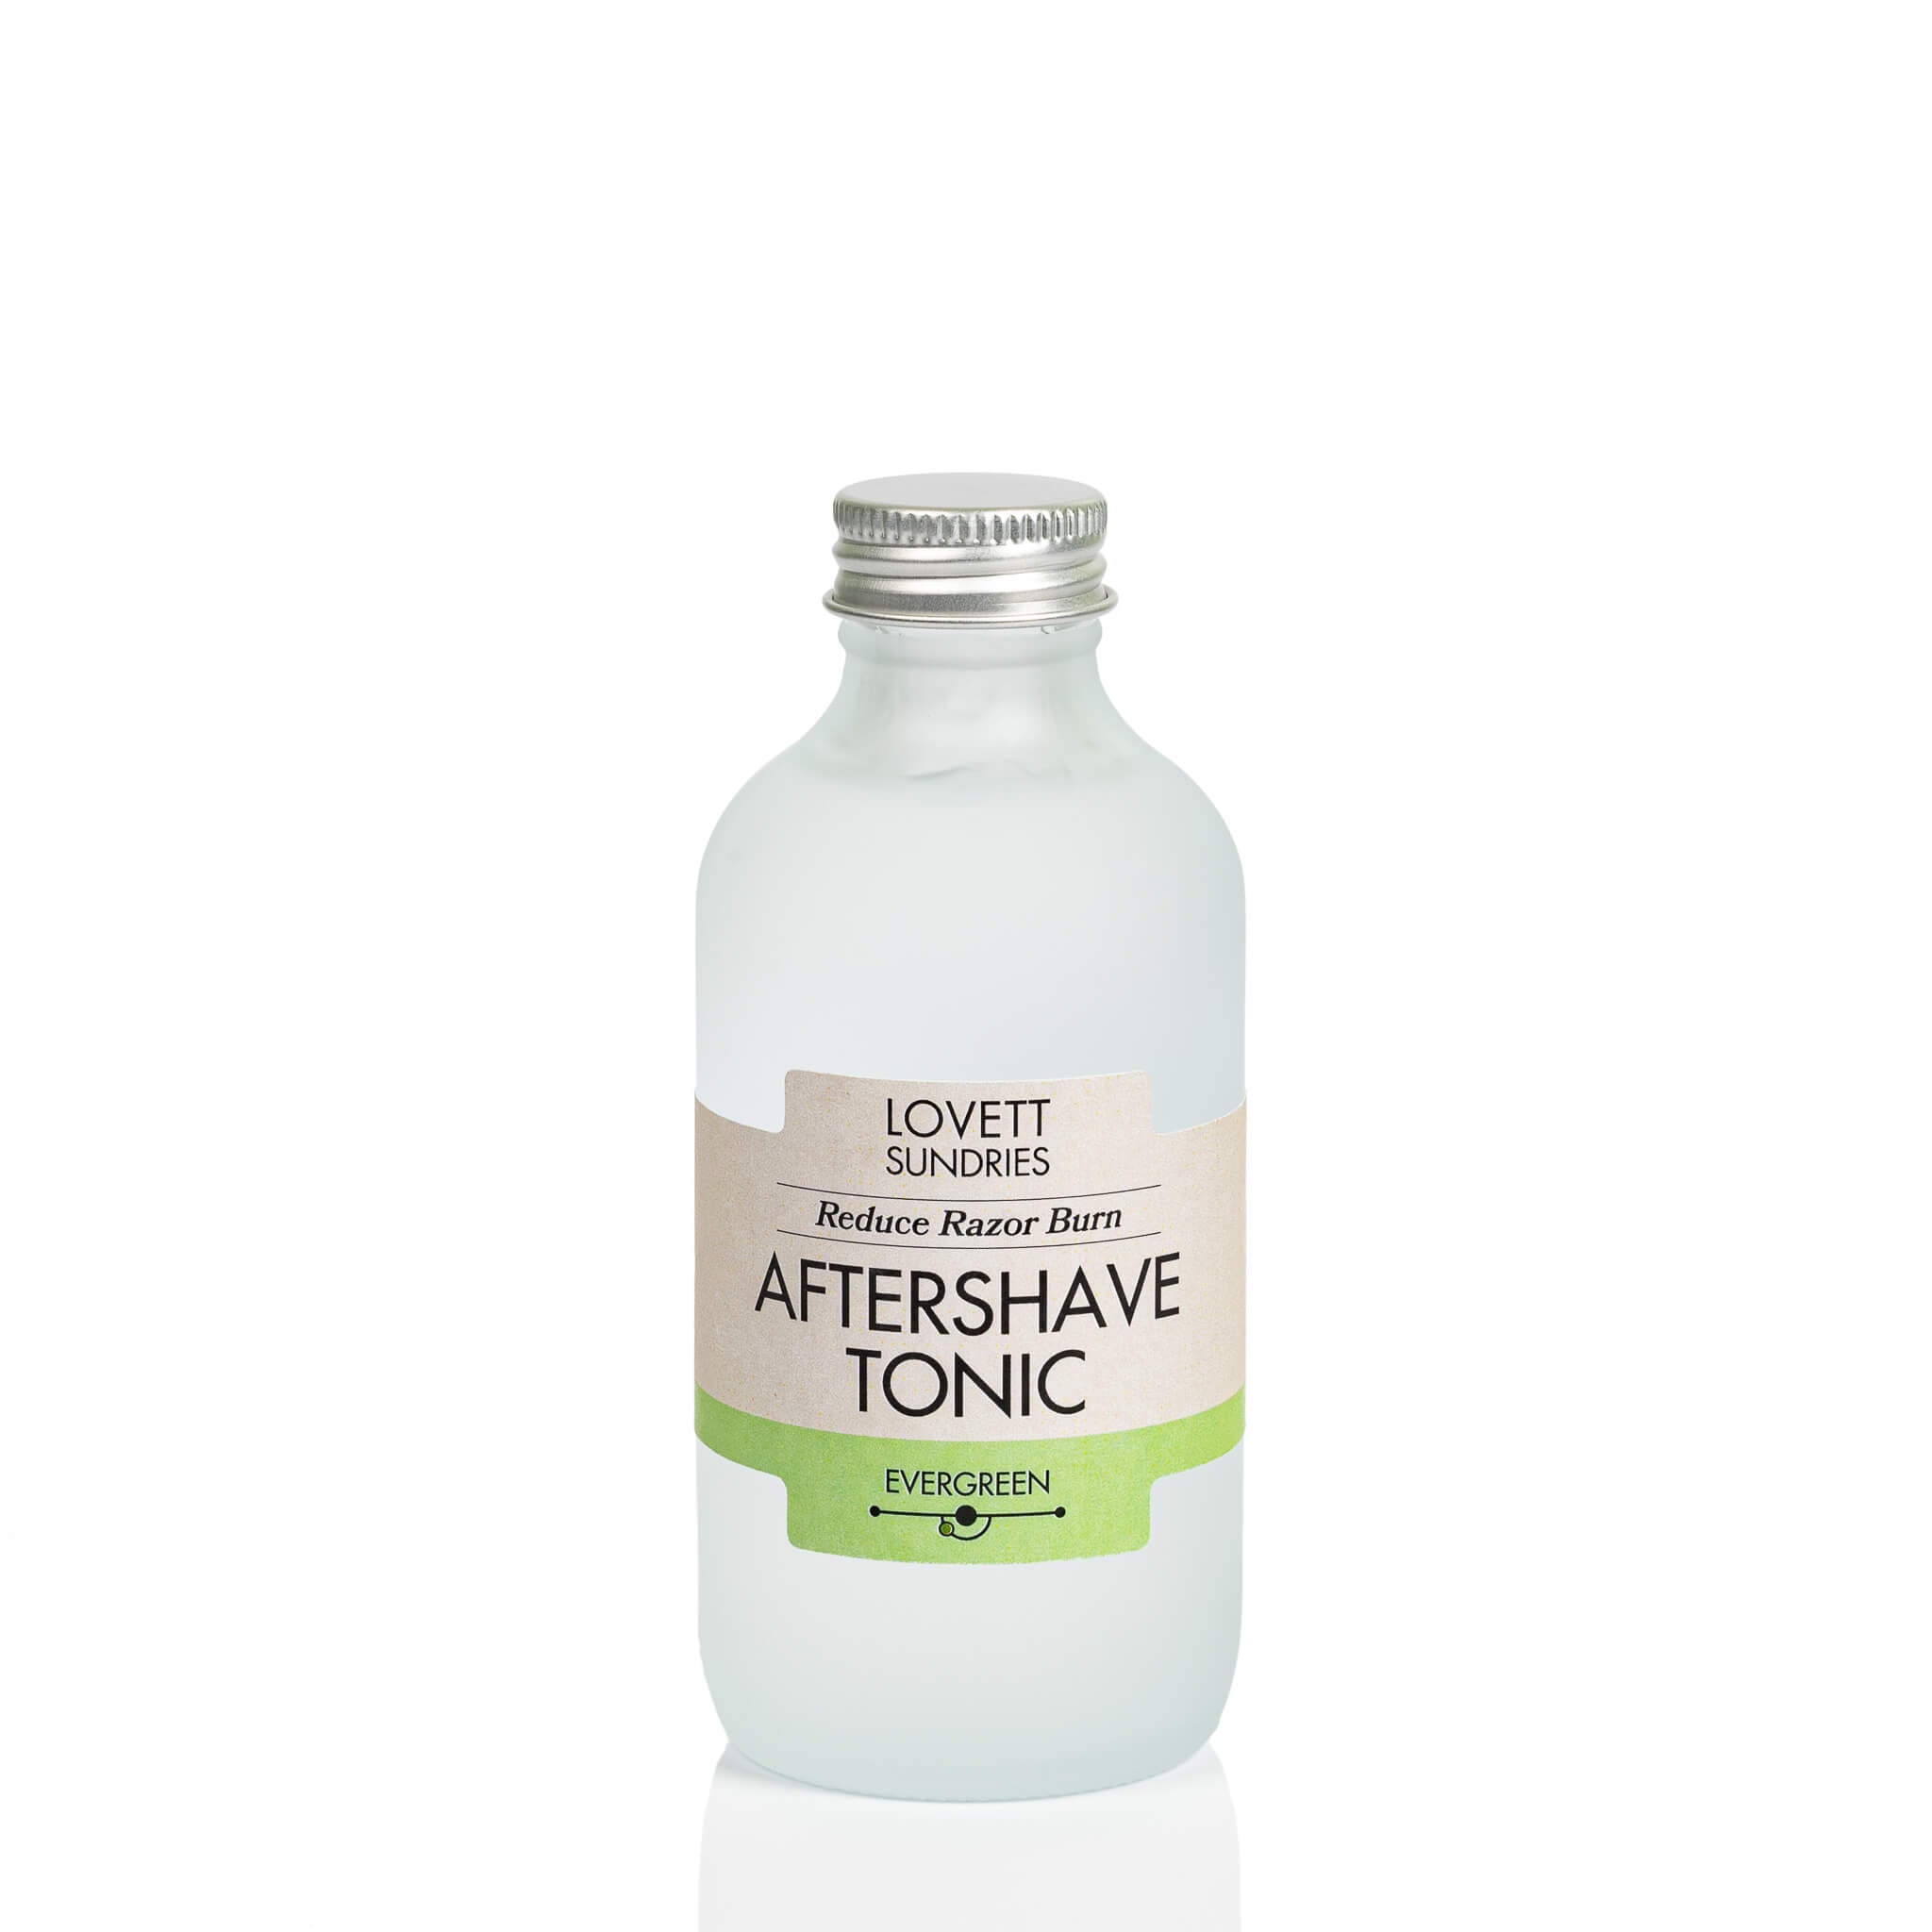 All natural evergreen scented aftershave tonic in a frosted glass bottle.